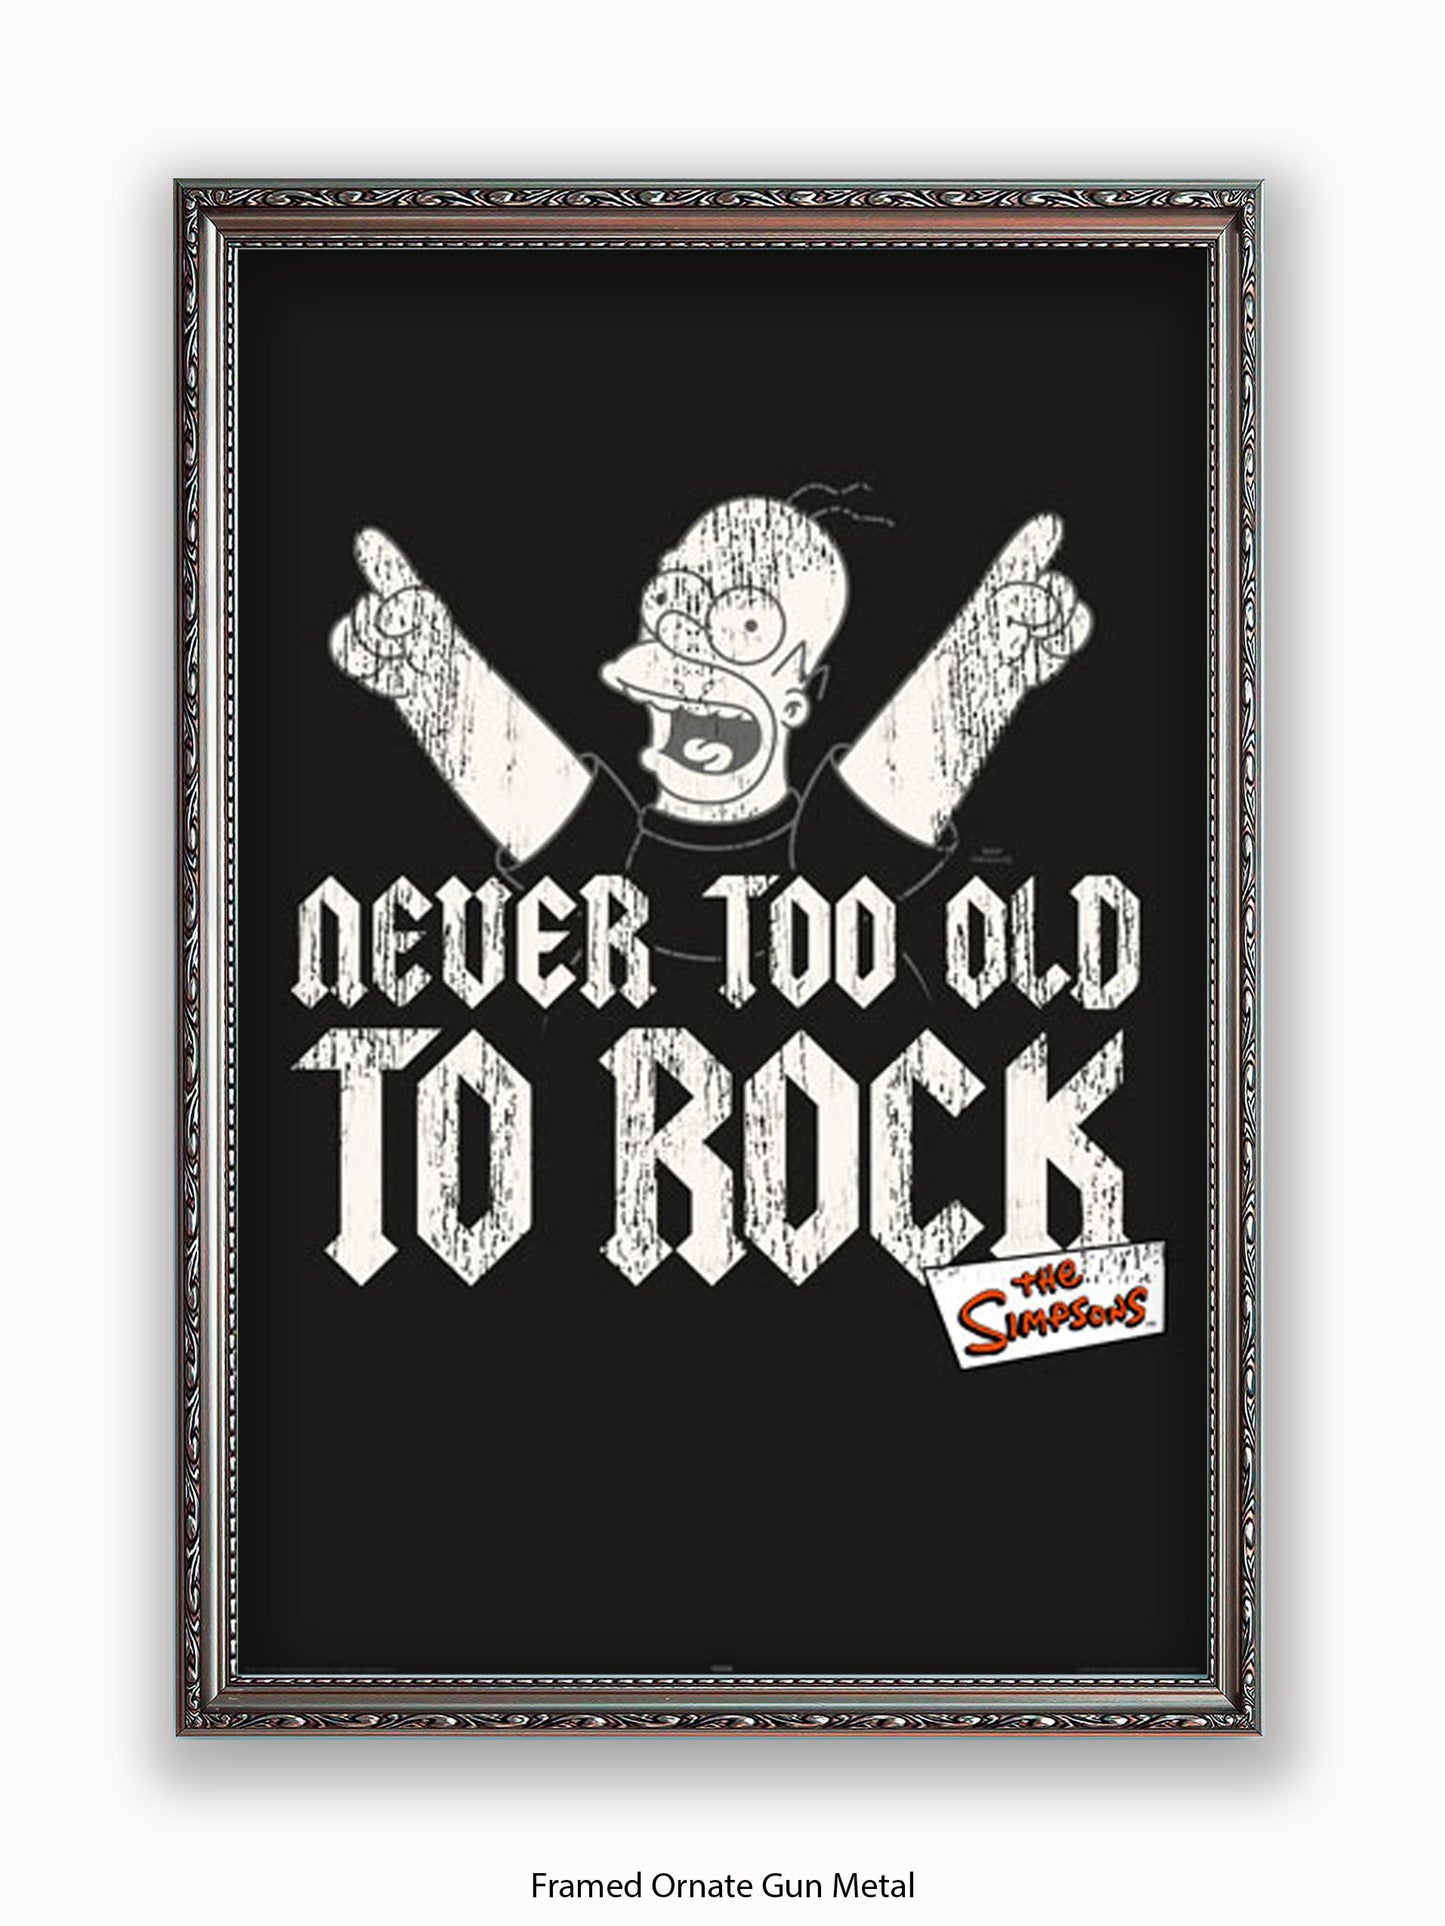 Simpsons  Homer  Never  Too  Old  2  Rock Poster